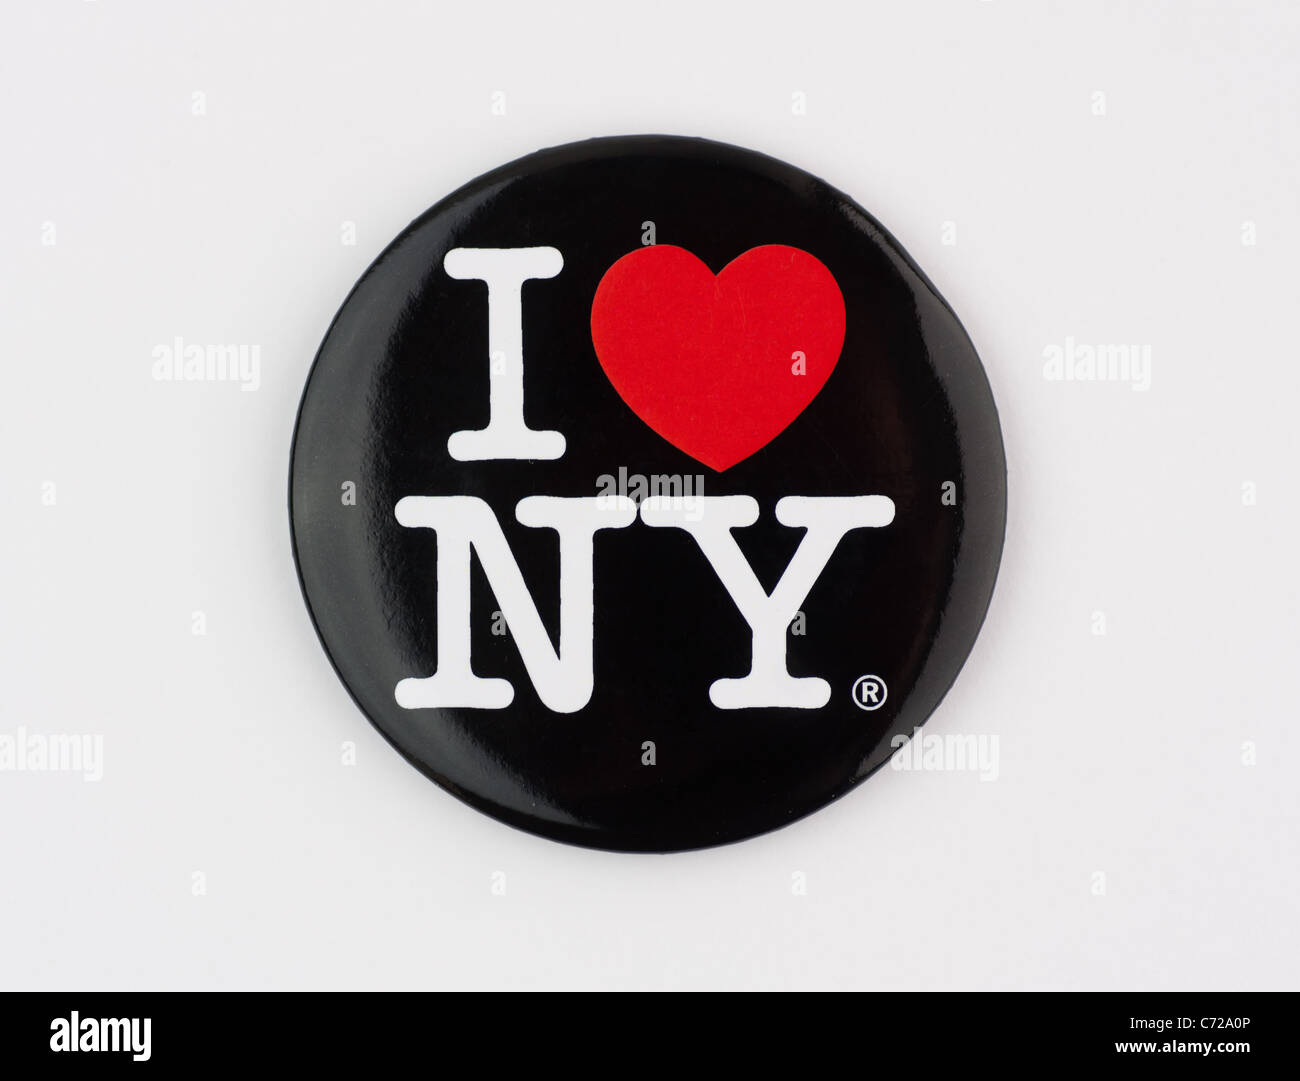 Muenster, Germany - September 10, 2011: Picture shows the famous 'i love ny' logo from the city of new york, printed on a badge. Stock Photo